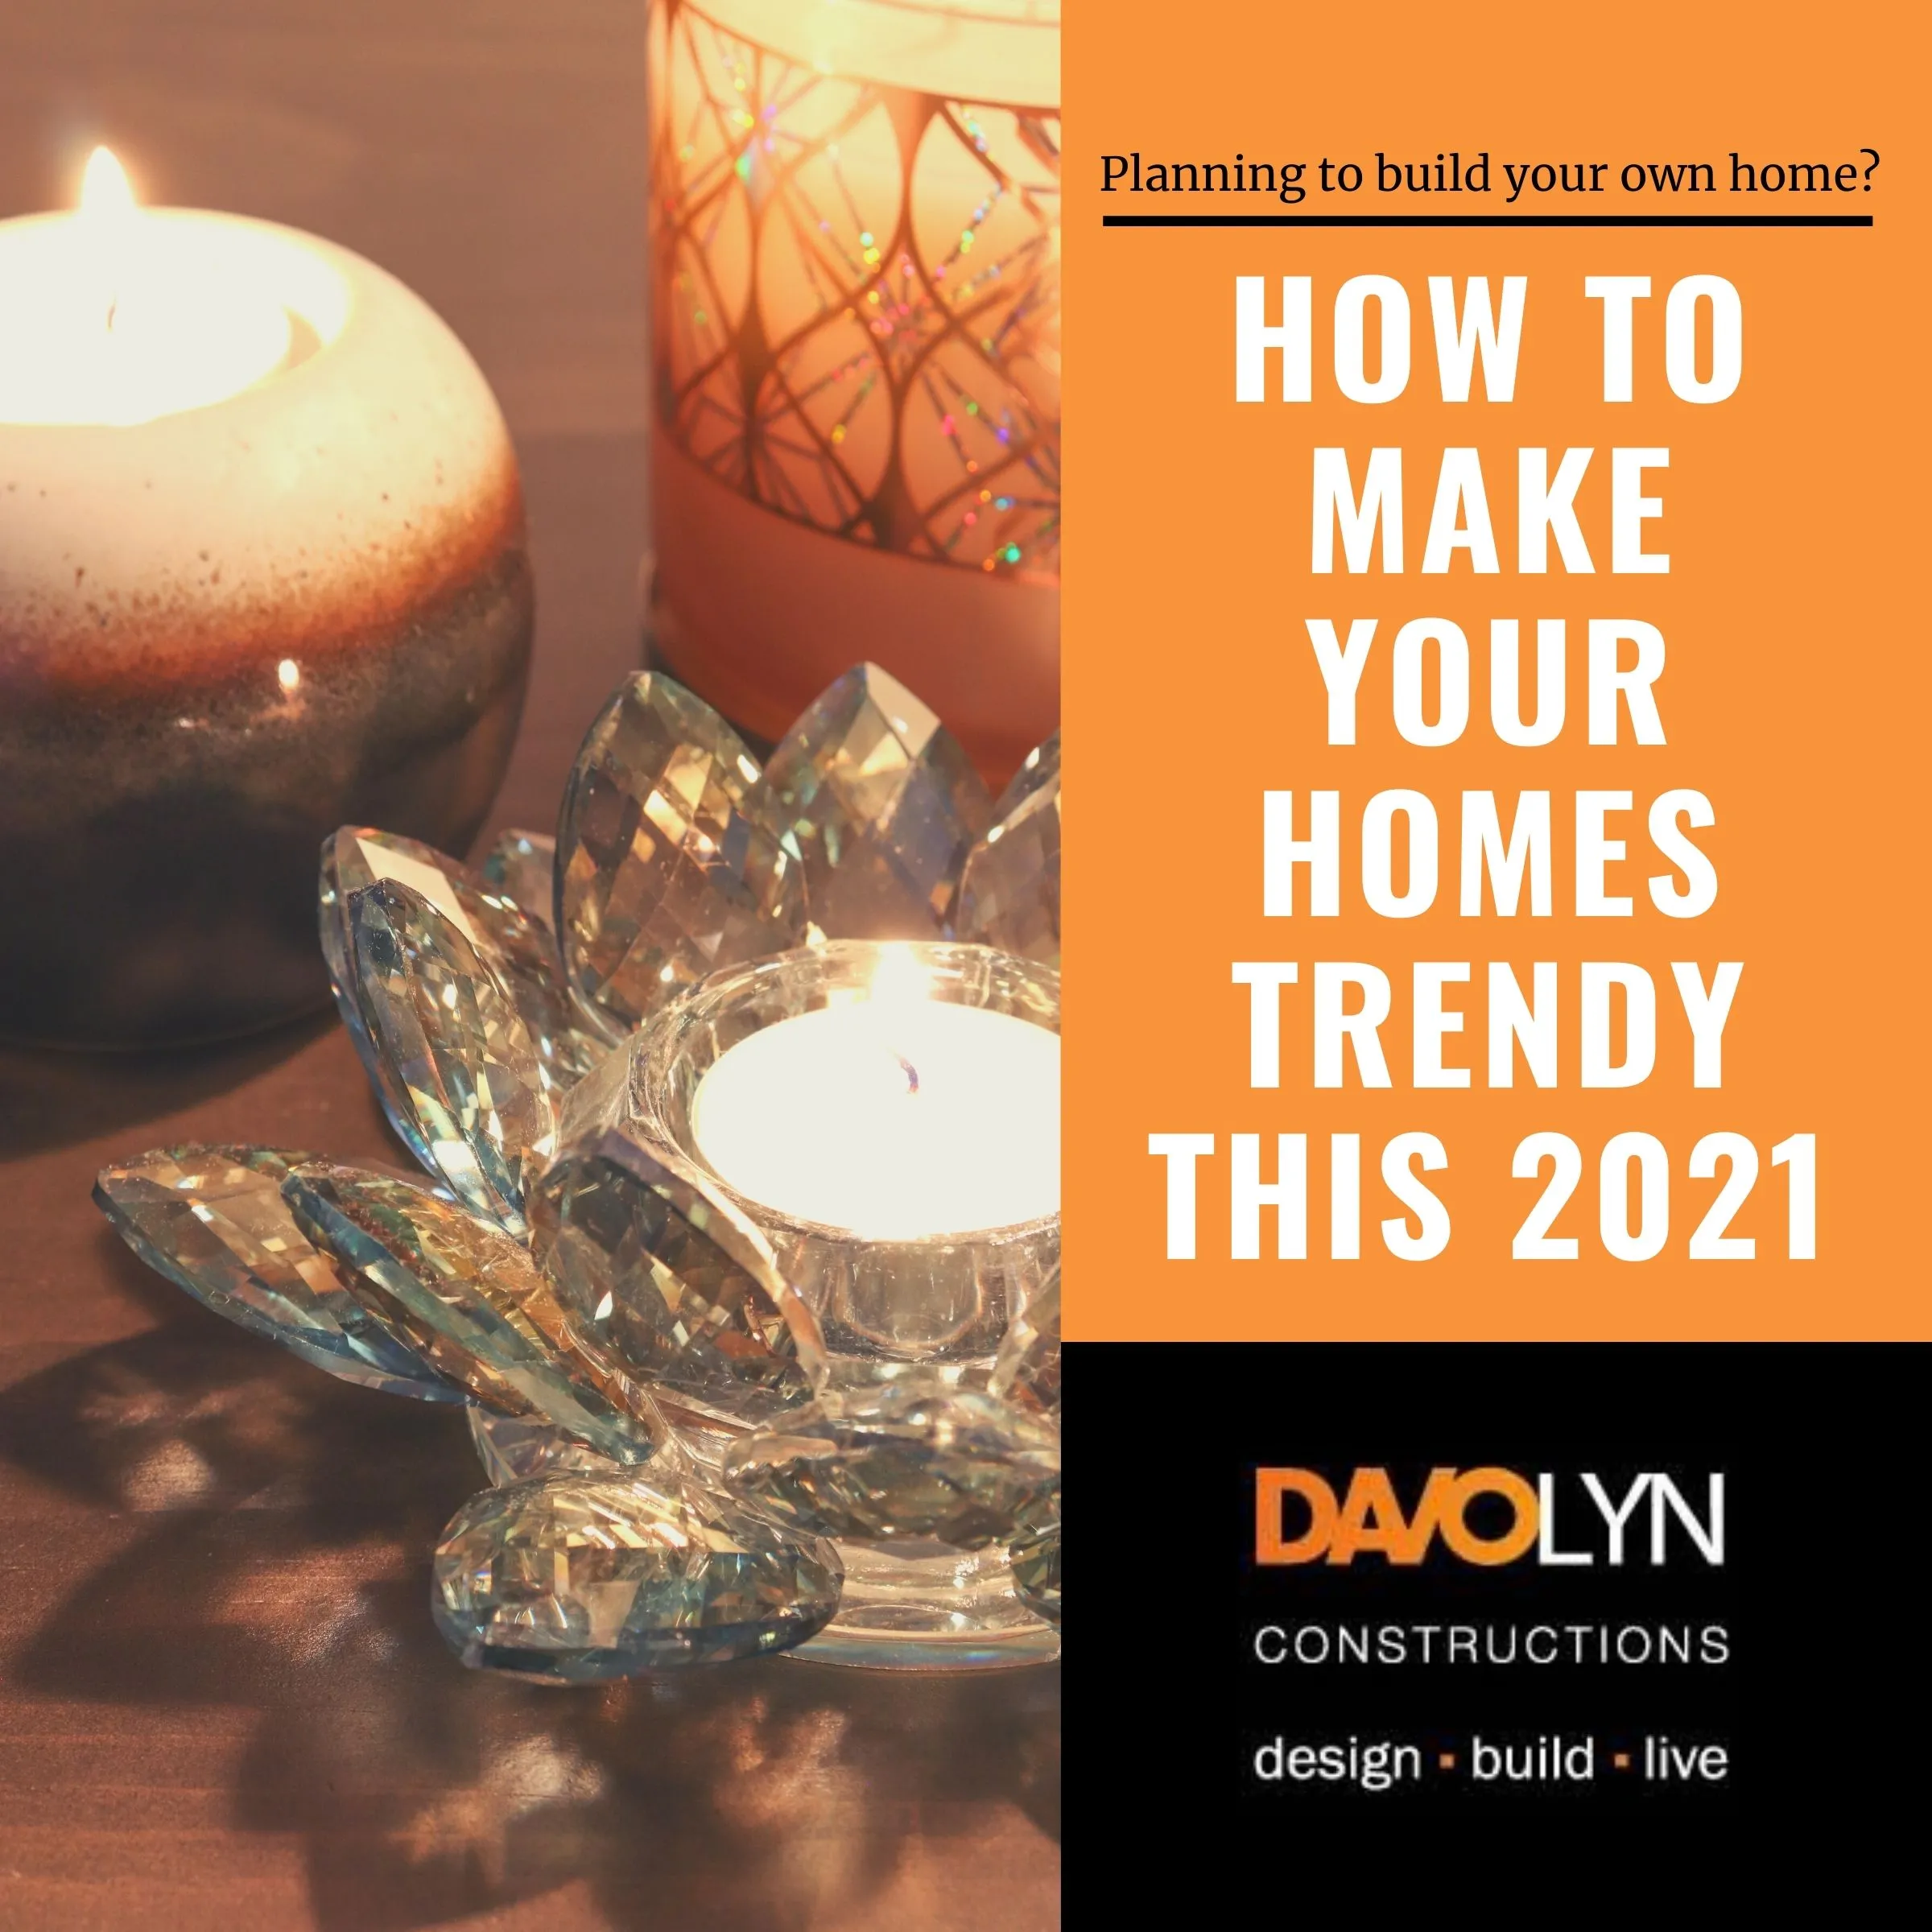 How to Make Your Homes Trendy This 2021